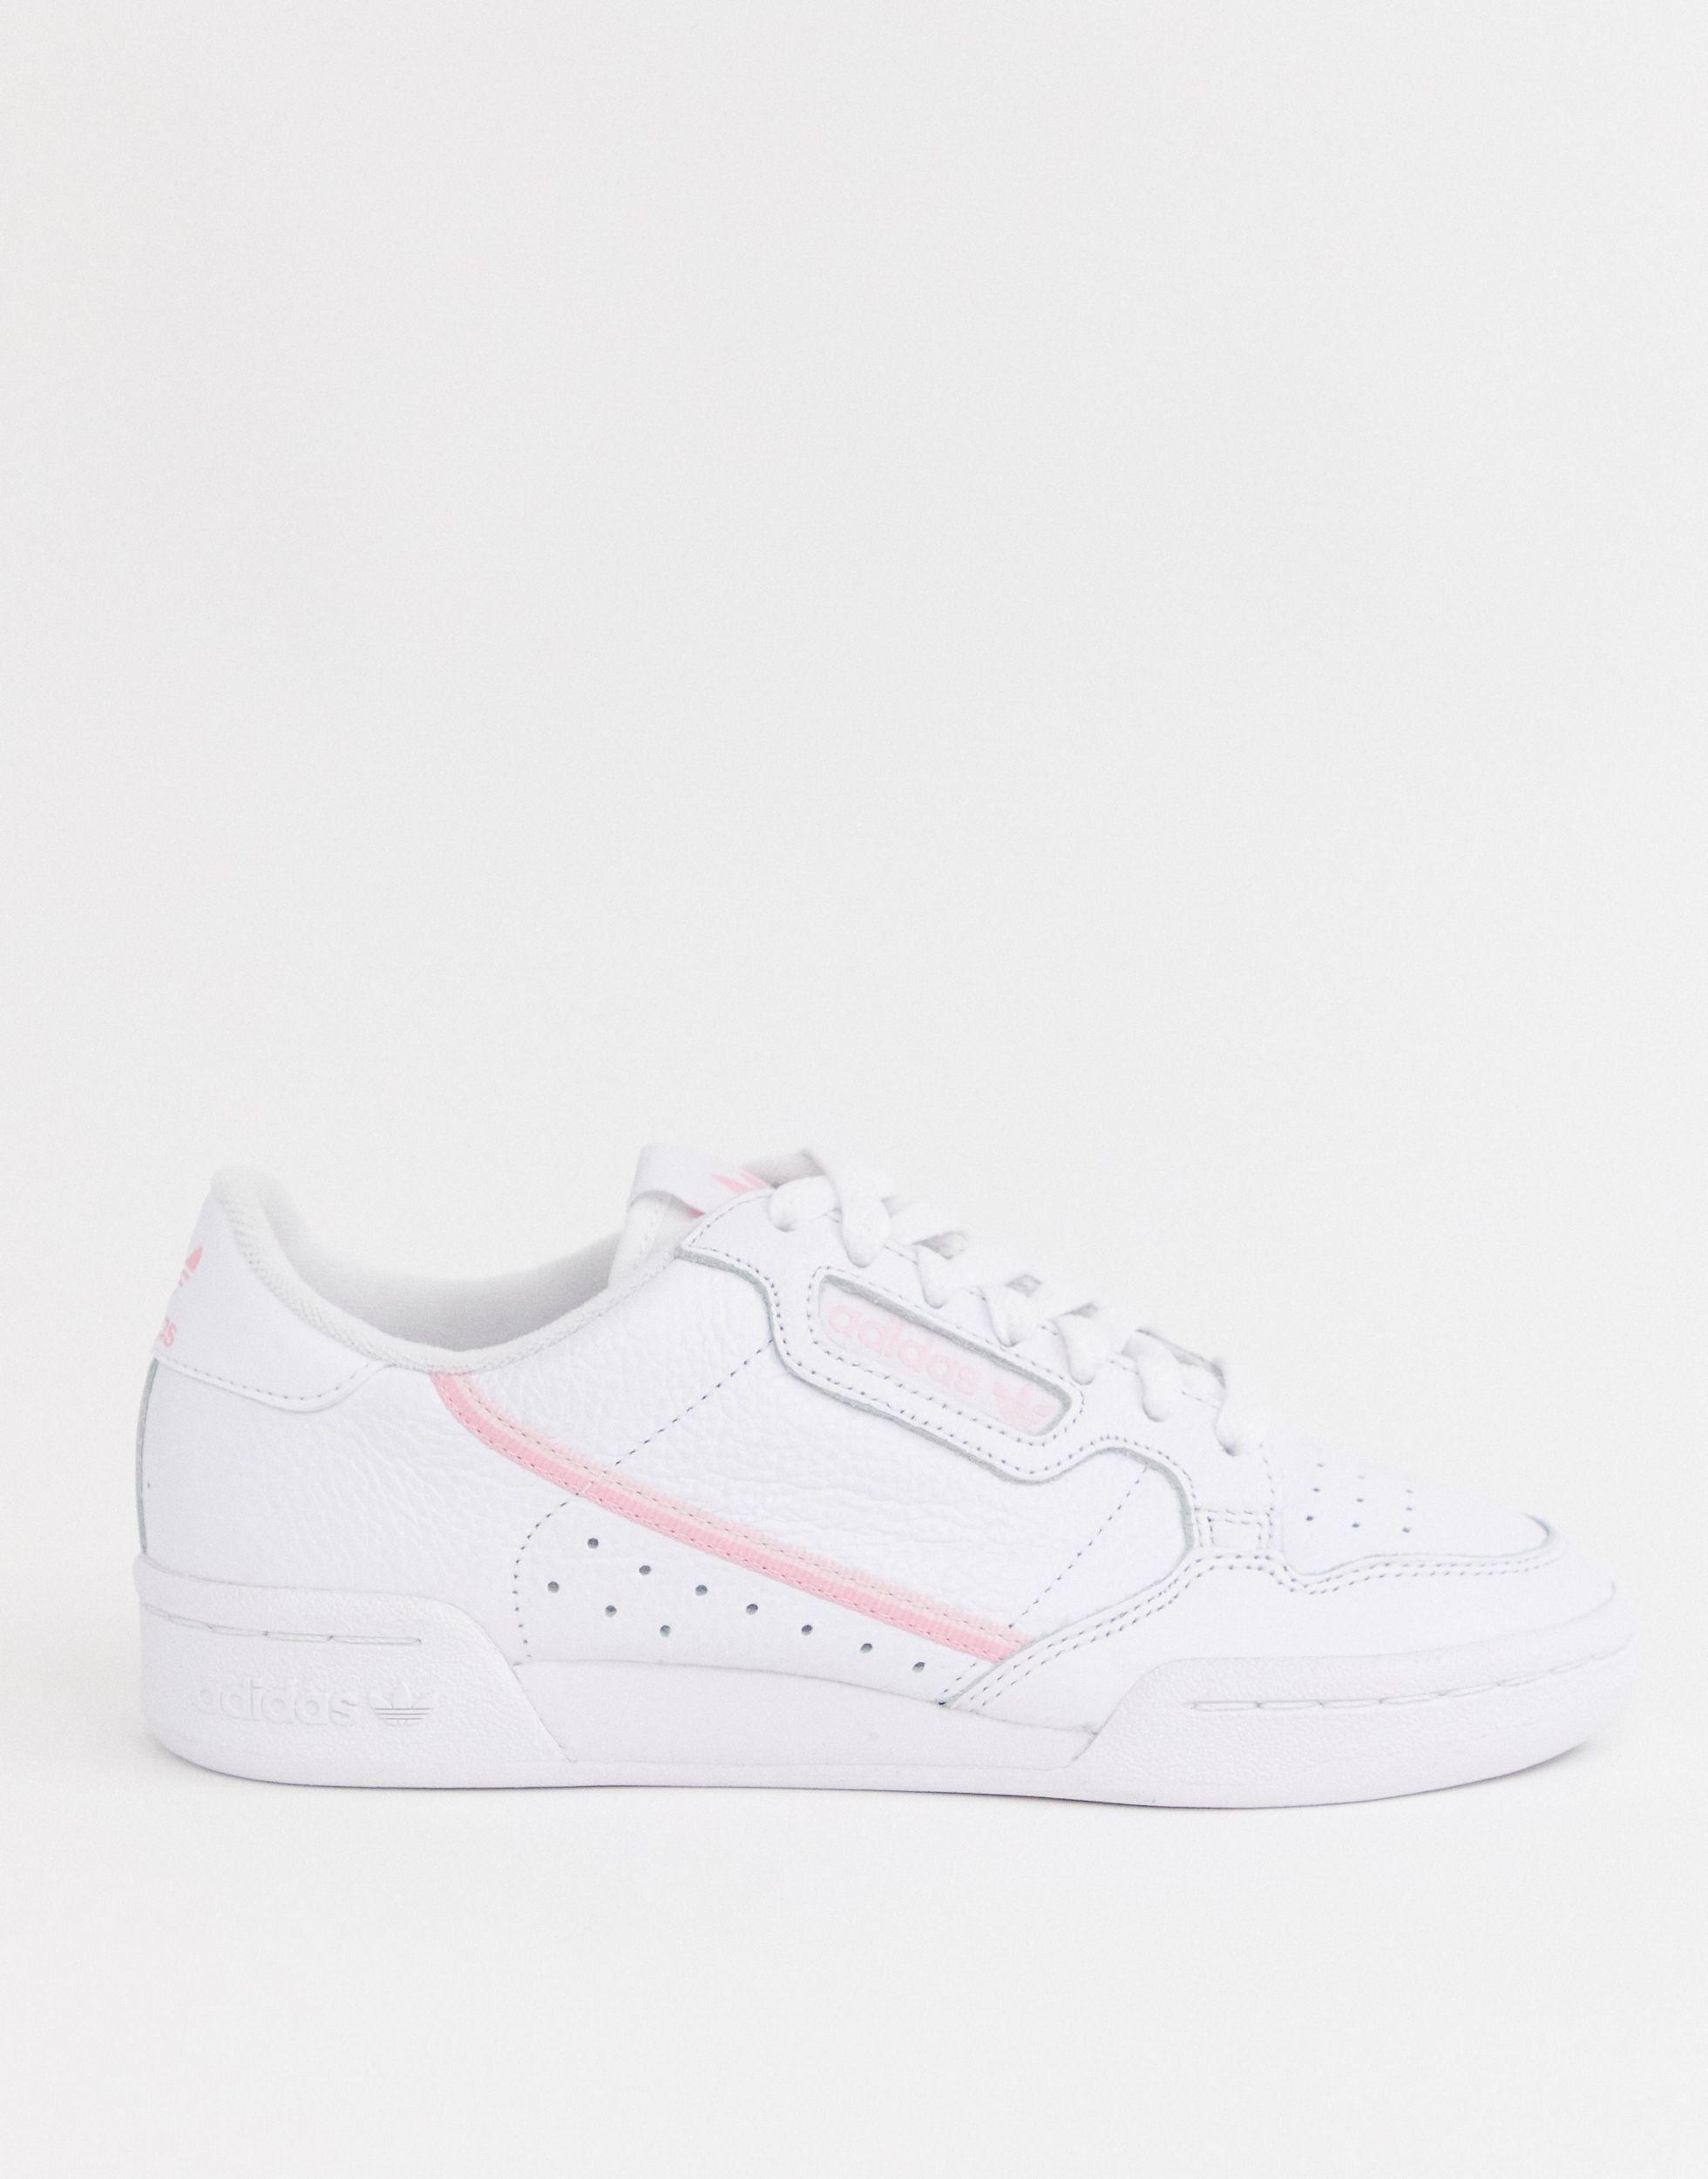 adidas Originals Leather White And Pink Continental 80 Trainers - Lyst